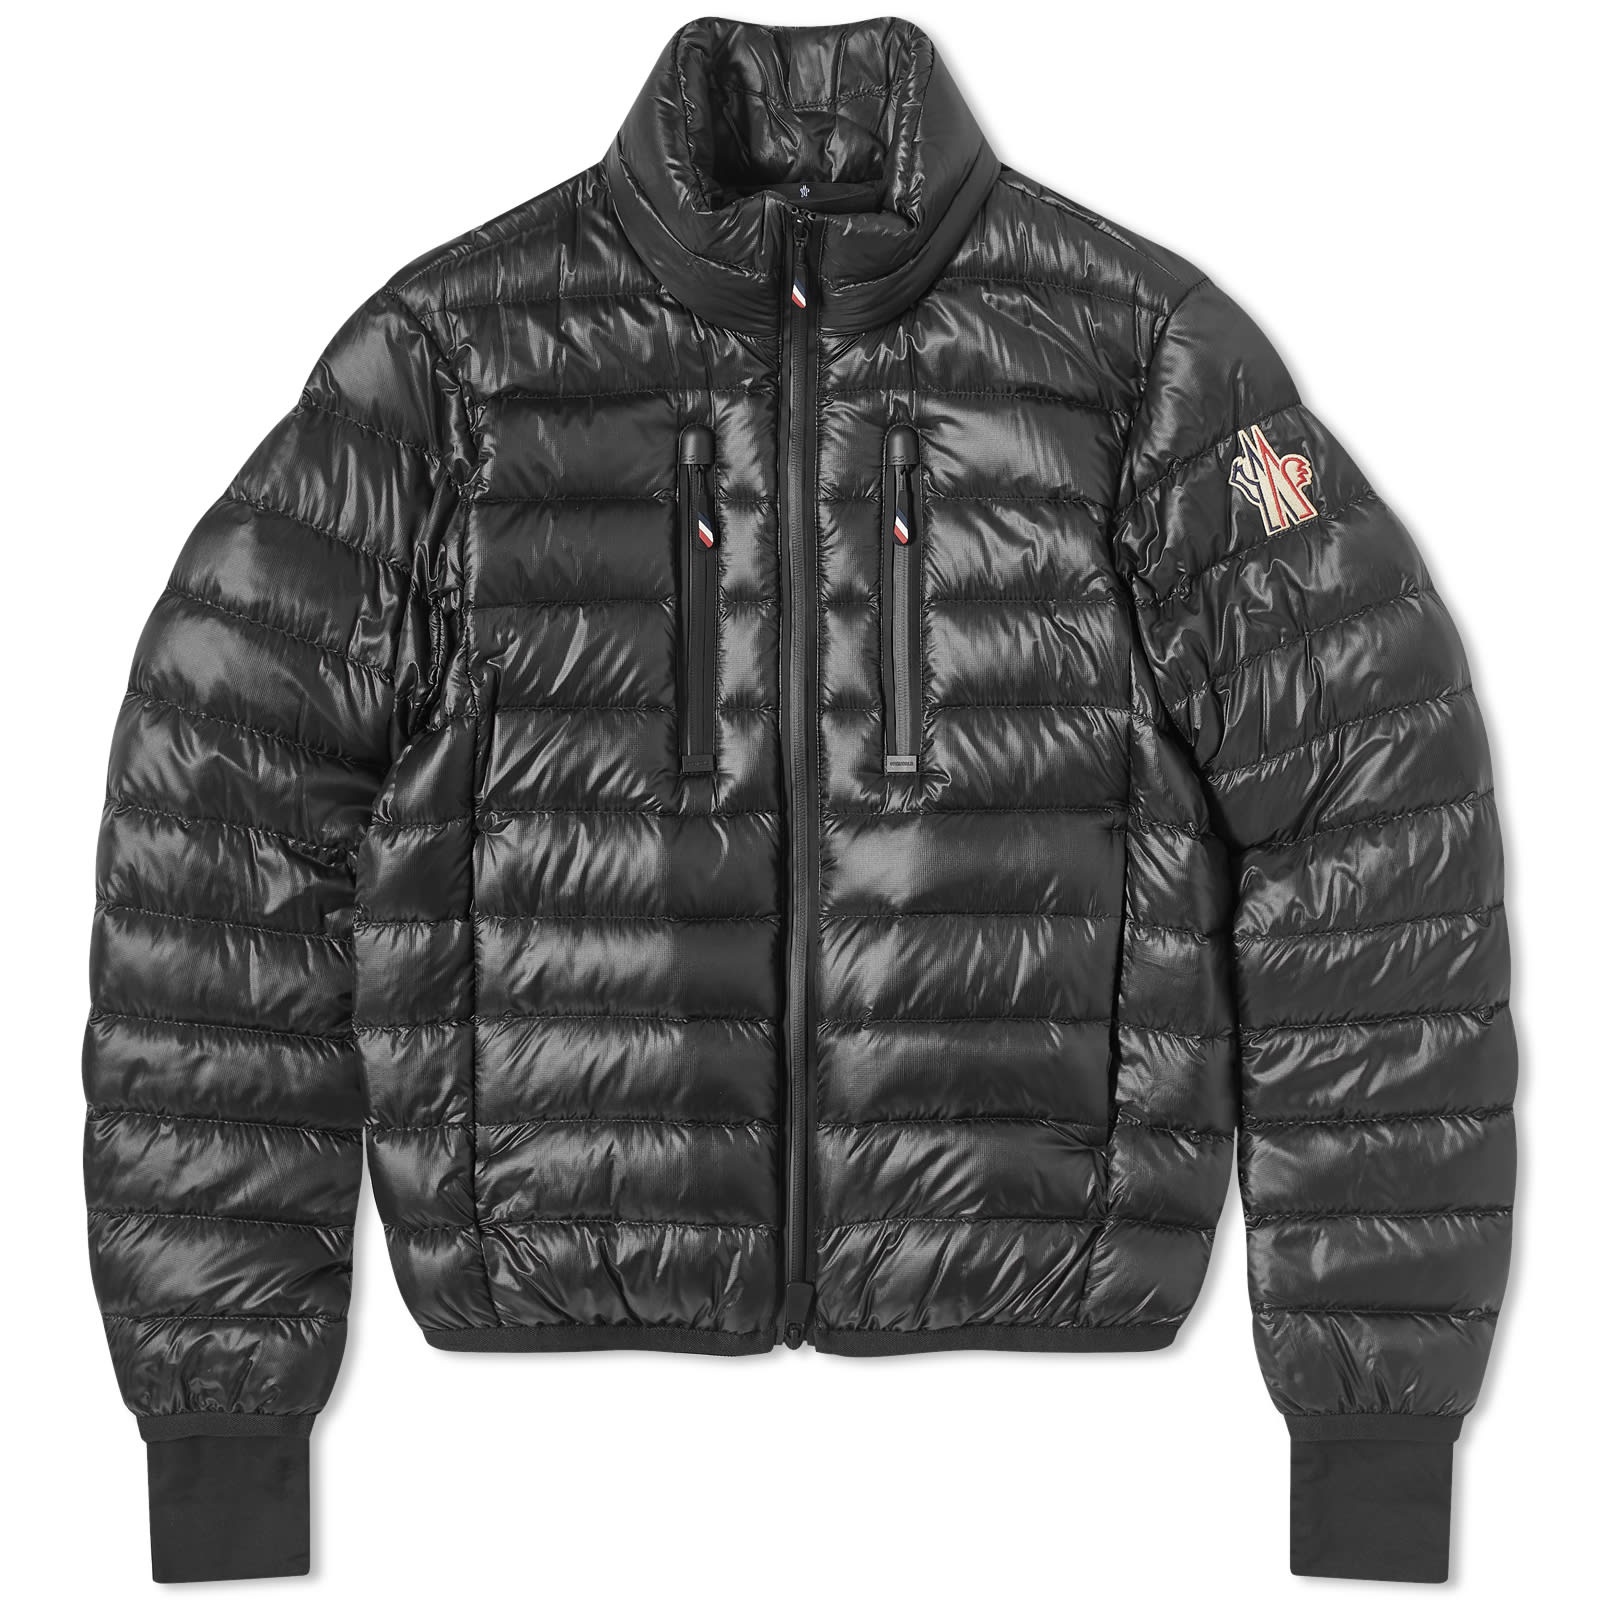 Moncler Grenoble Hers Micro Ripstop Jacket - 1